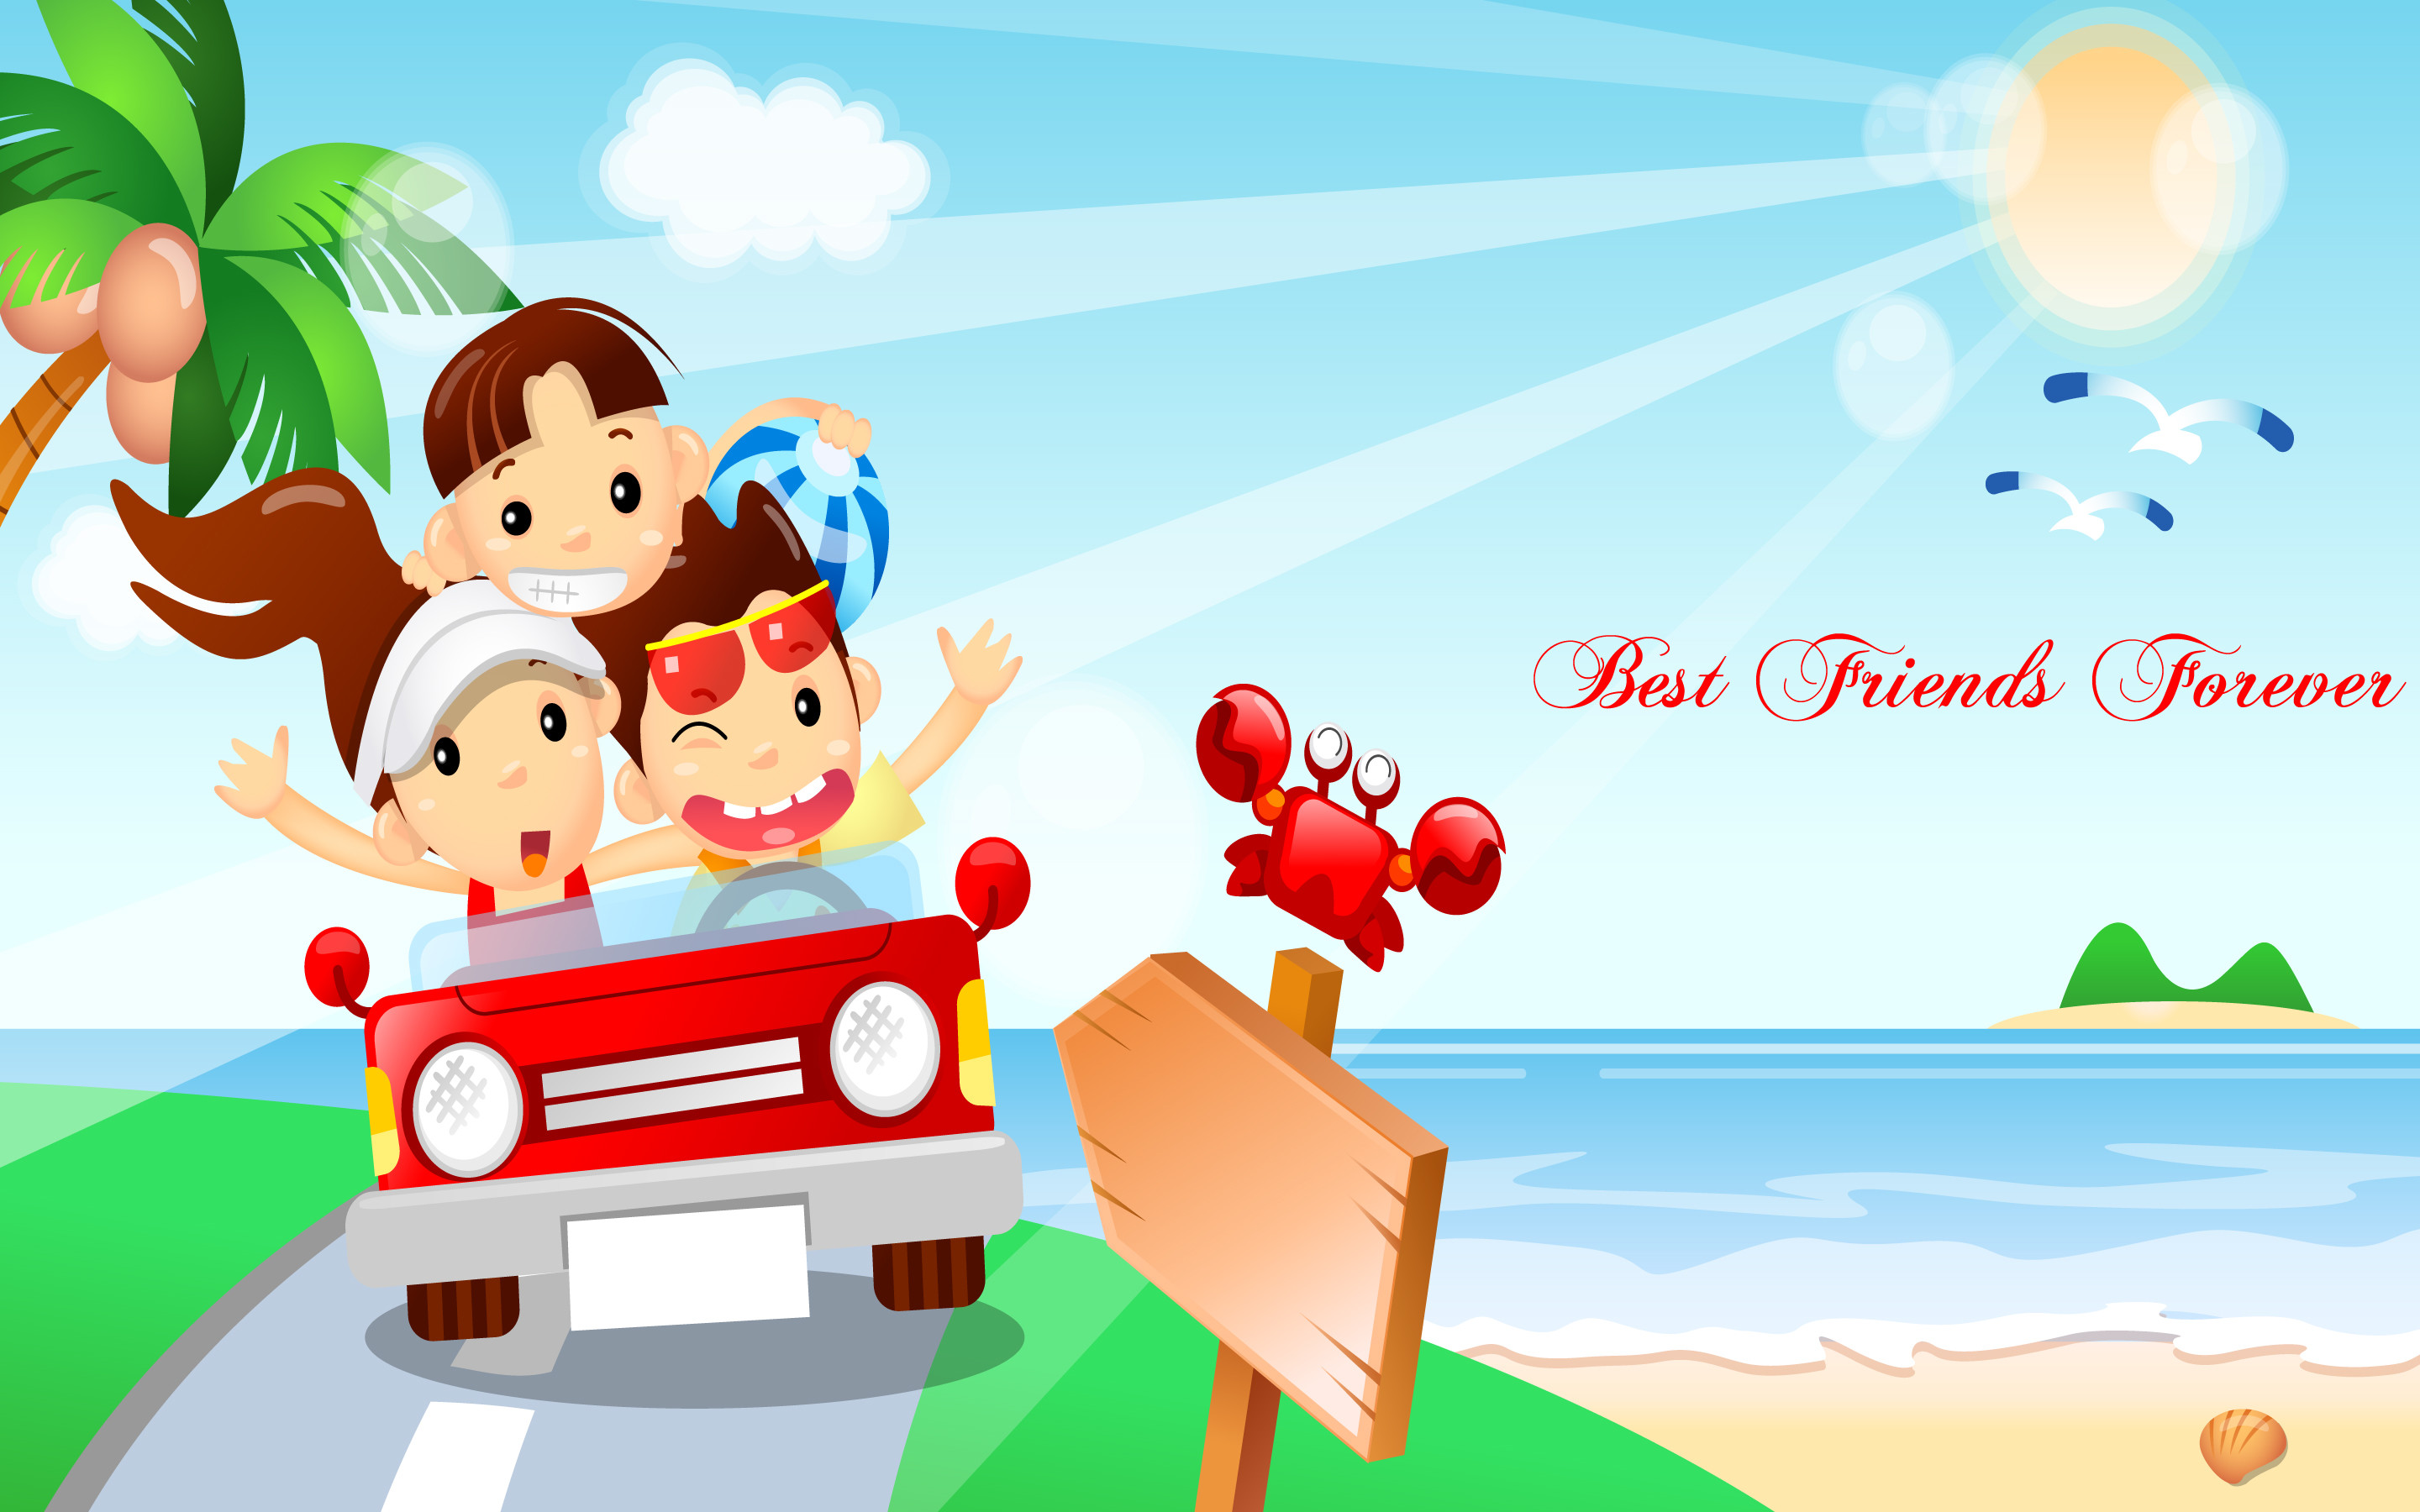 friends forever hd wallpapers,cartoon,animated cartoon,mode of transport,illustration,fun